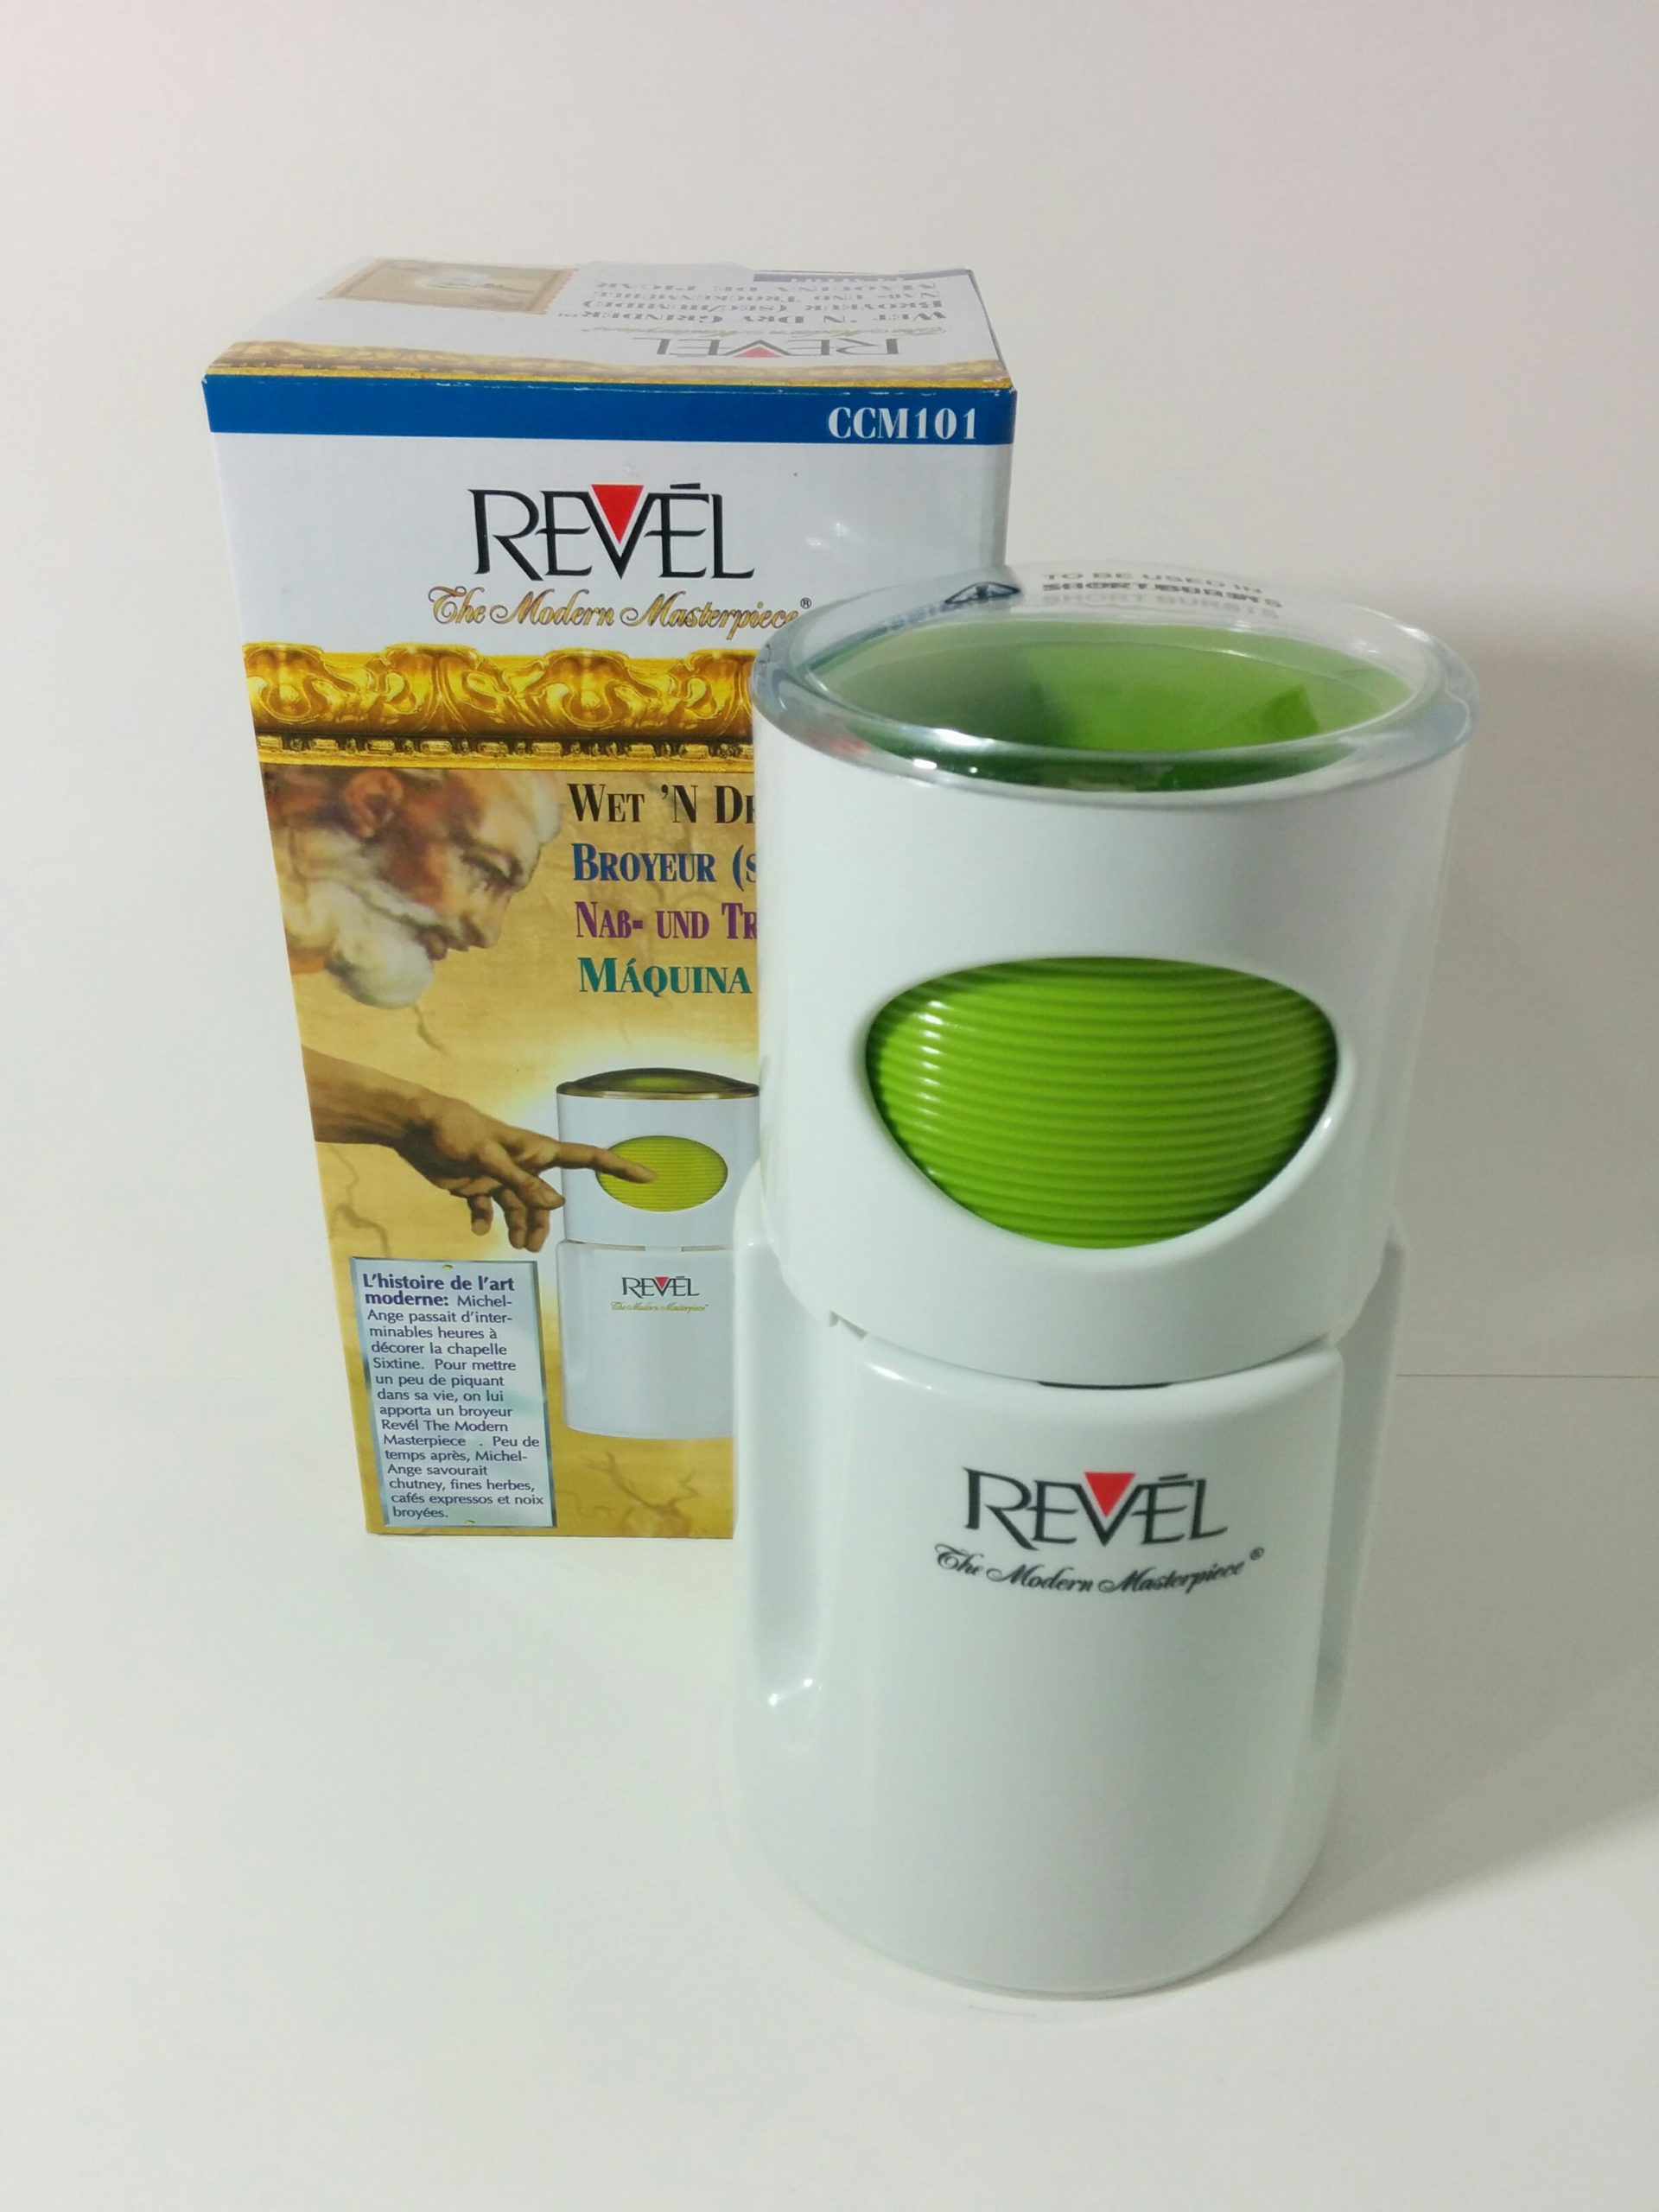 White Revel CCM101 110-volt Wet and Dry Coffee/Spice Grinder 